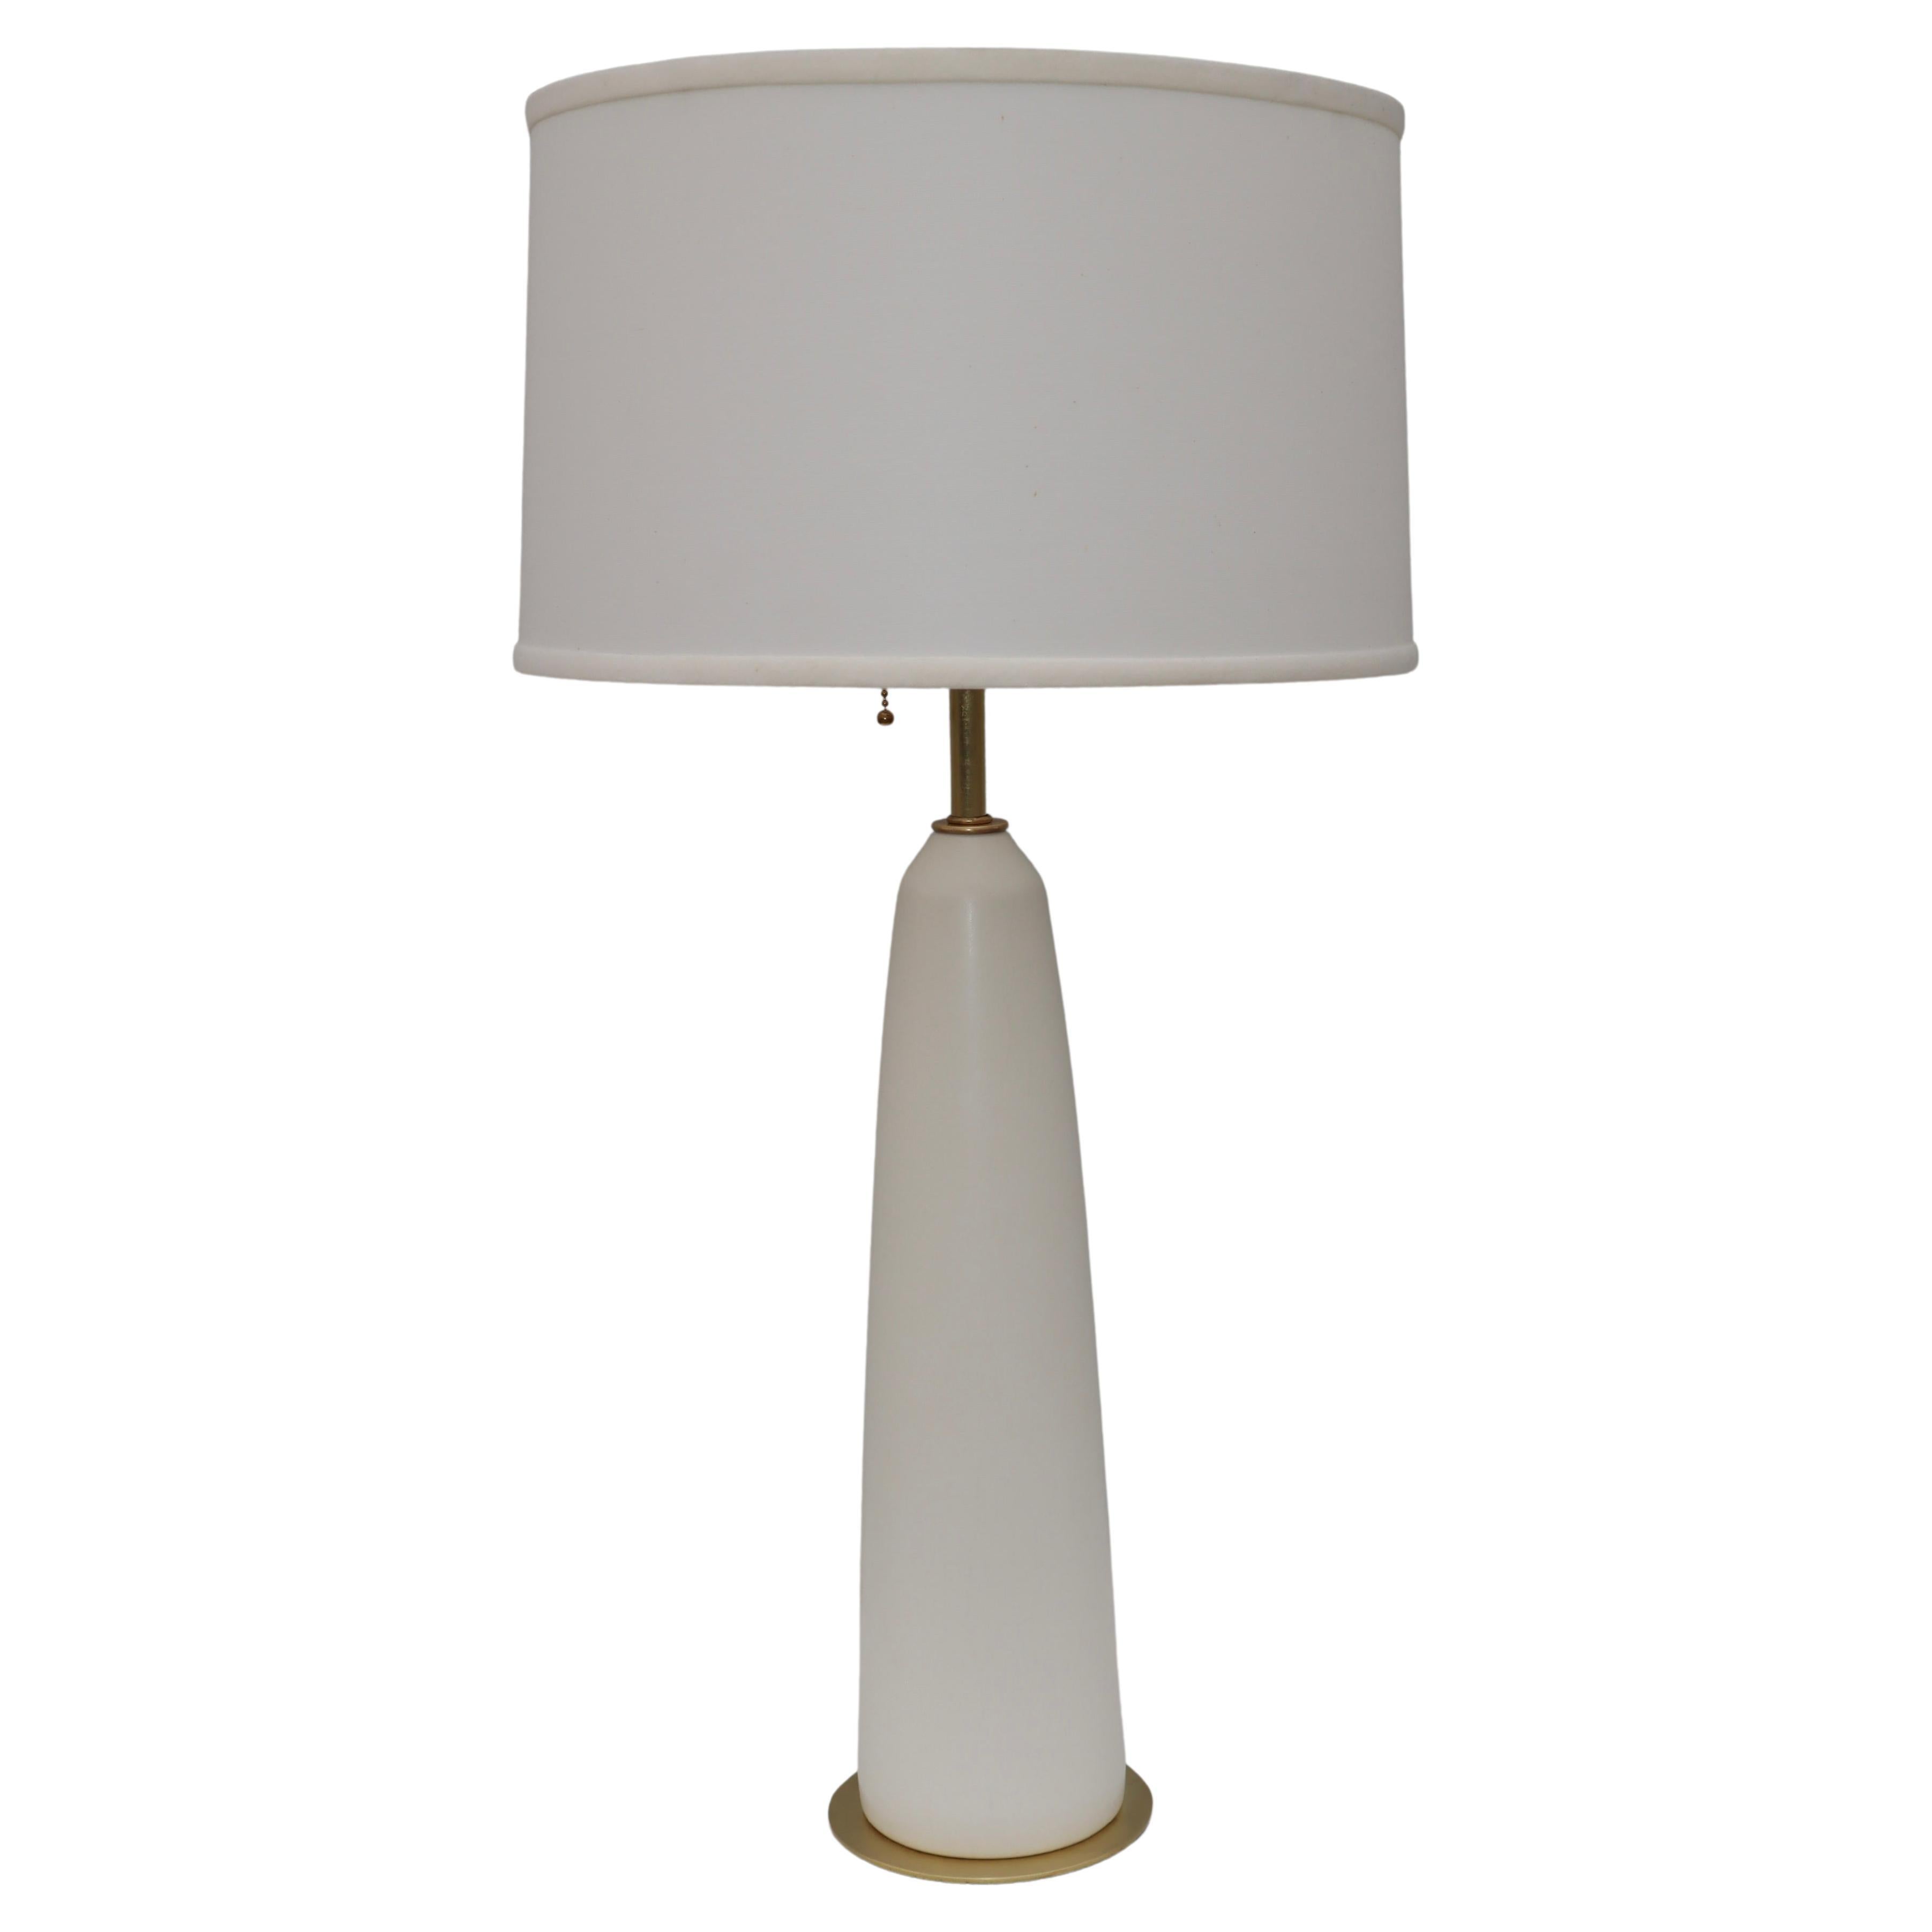 Stewart Ross Pair of Table Lamps For Sale at 1stDibs ross lamps for